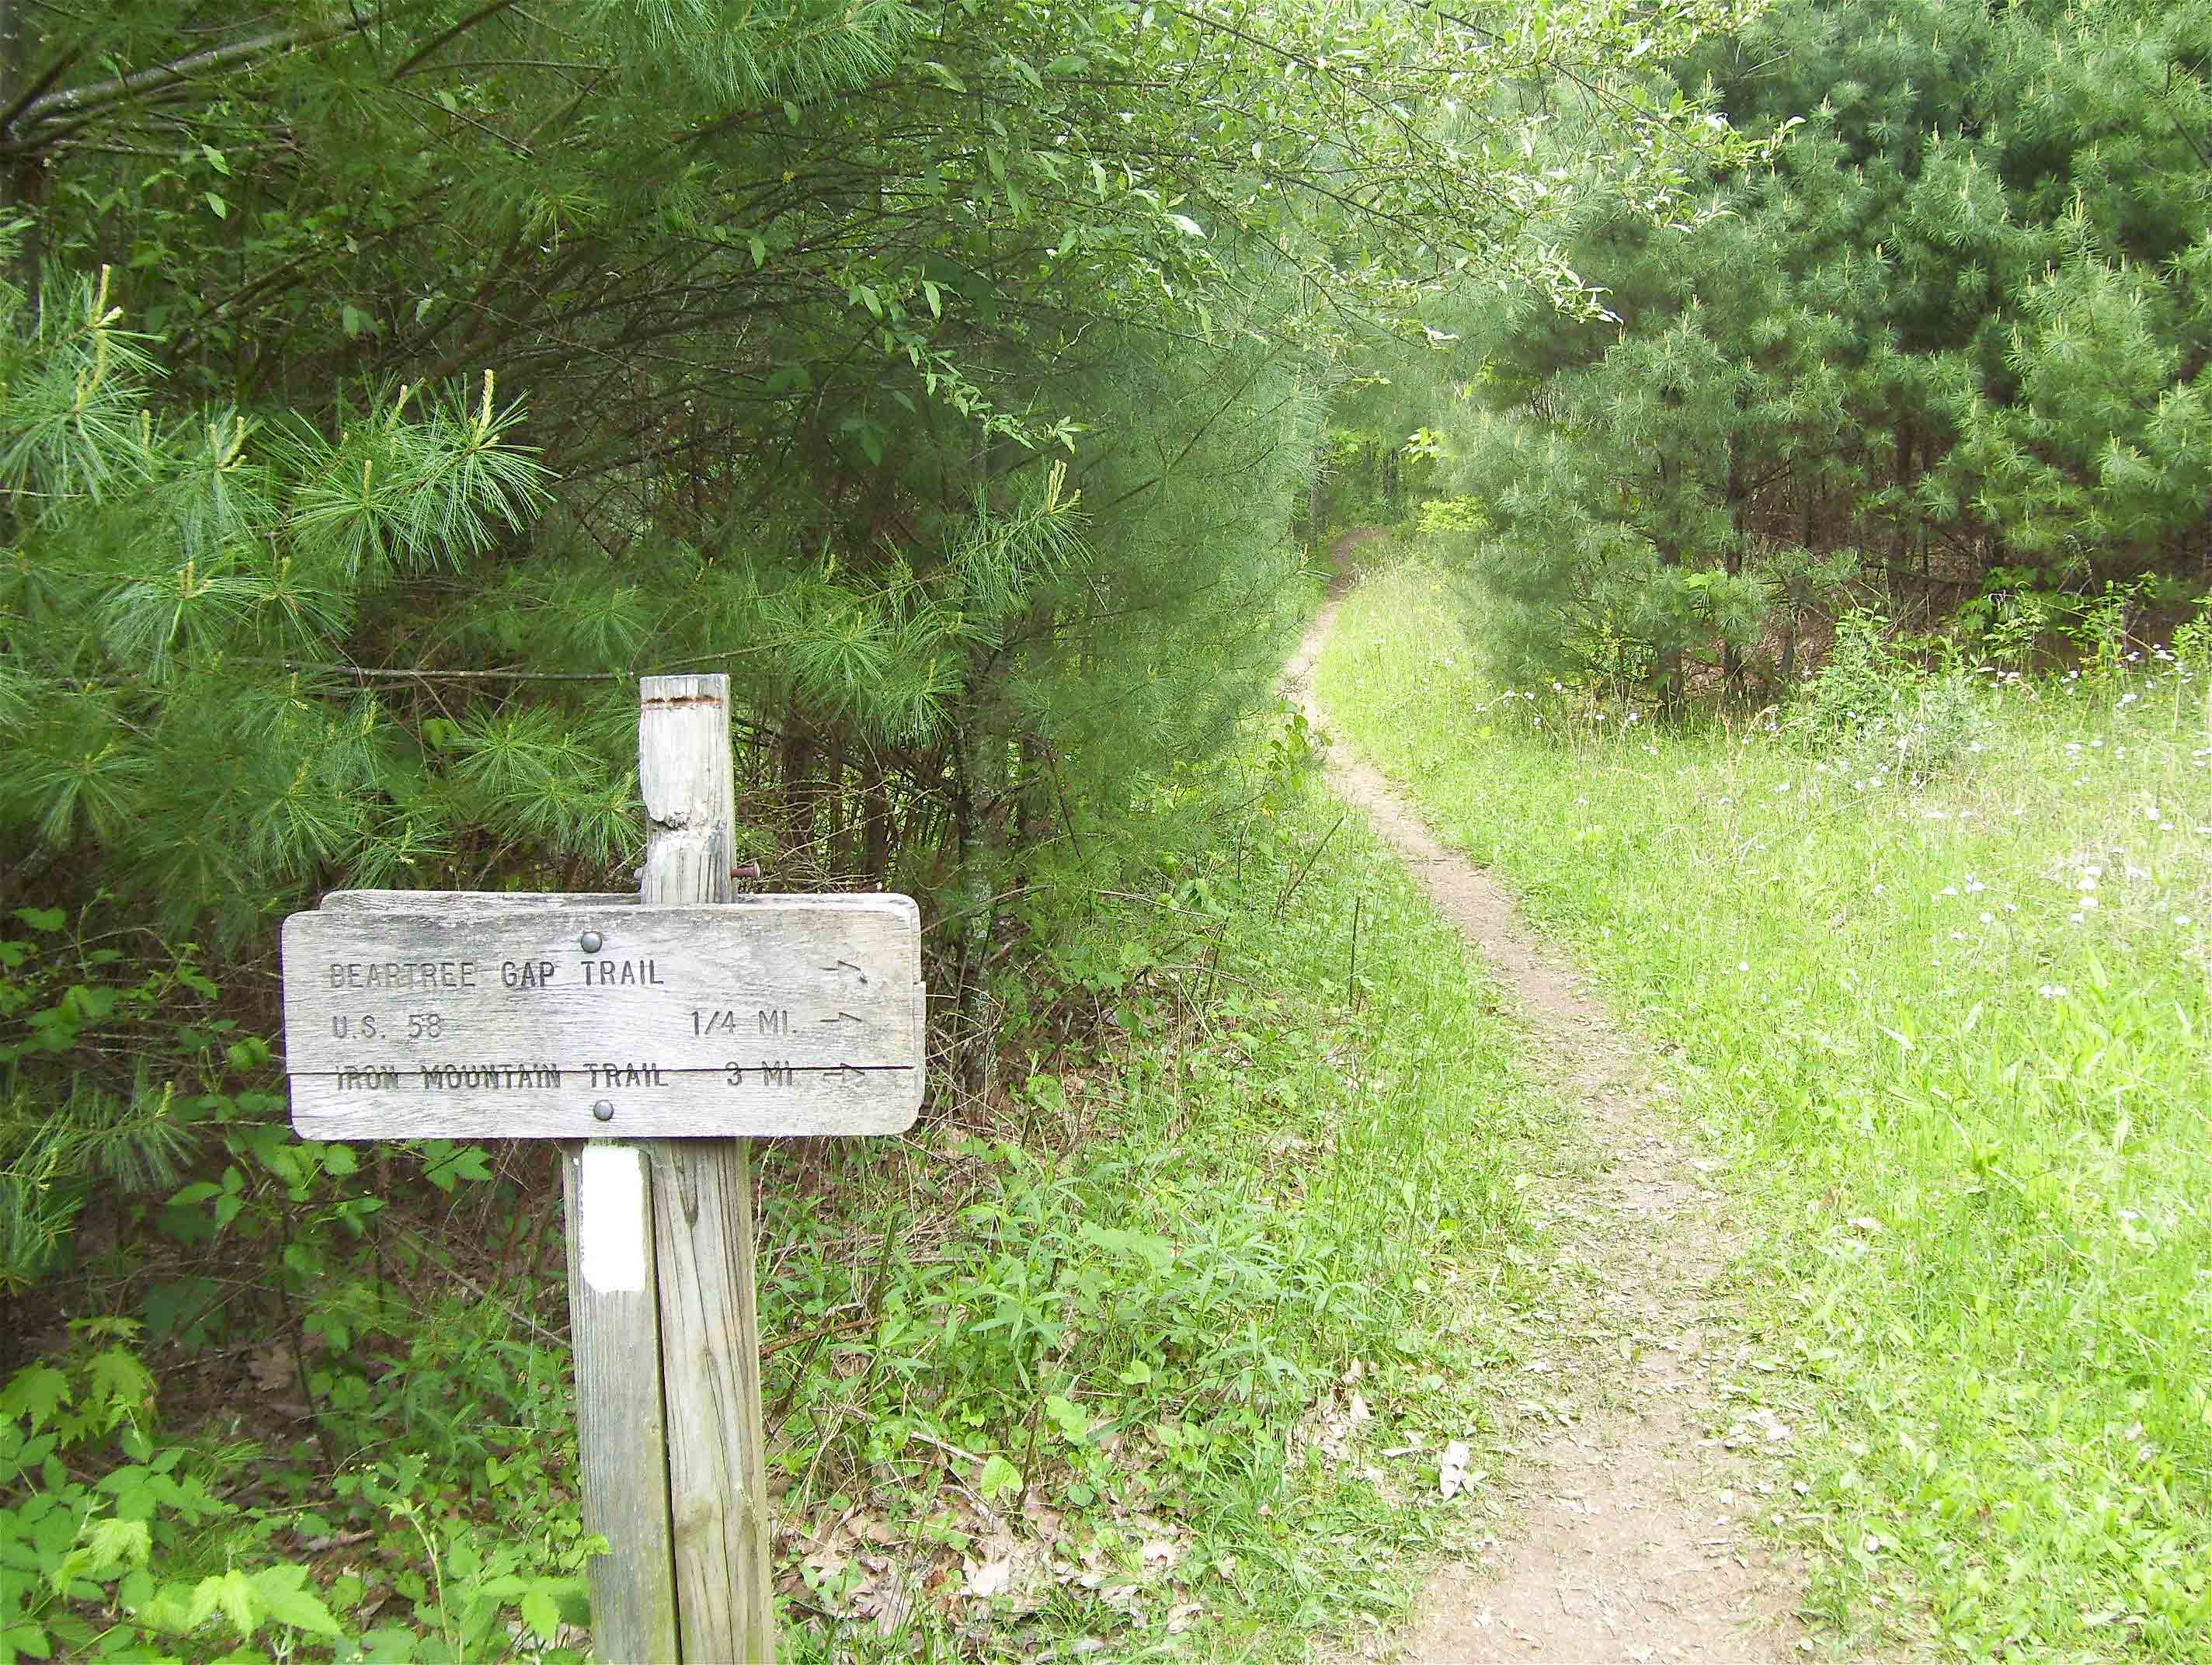 MM 5.2 Junction with Beartree Gap Trail. A violet-blazed side trail leads 0.2 miles to US 58 and another 0,3 miles to a parking area.  Courtesy dlcul@conncoll.edu